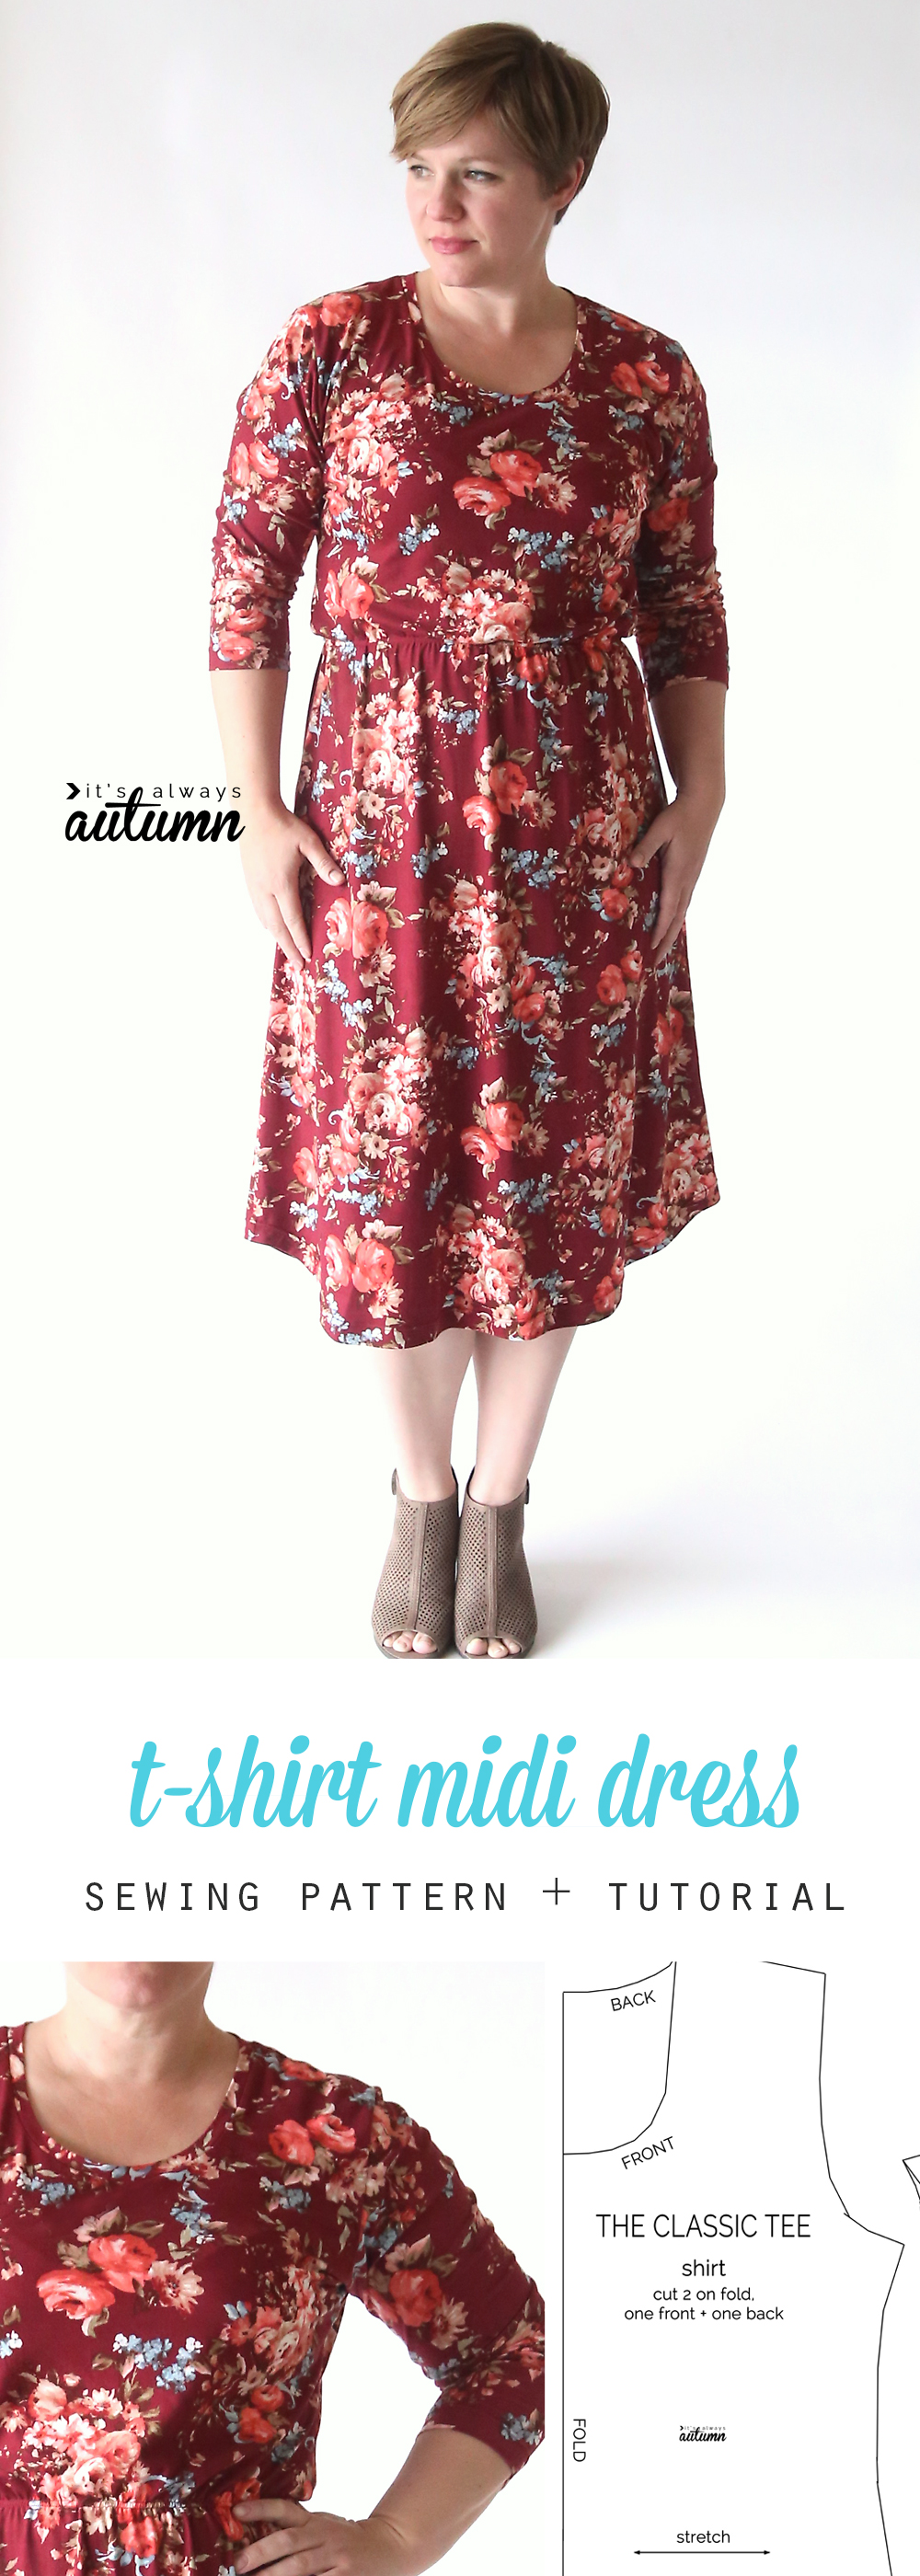 Collage photo of a woman wearing a t-shirt midi dress and a t-shirt sewing pattern